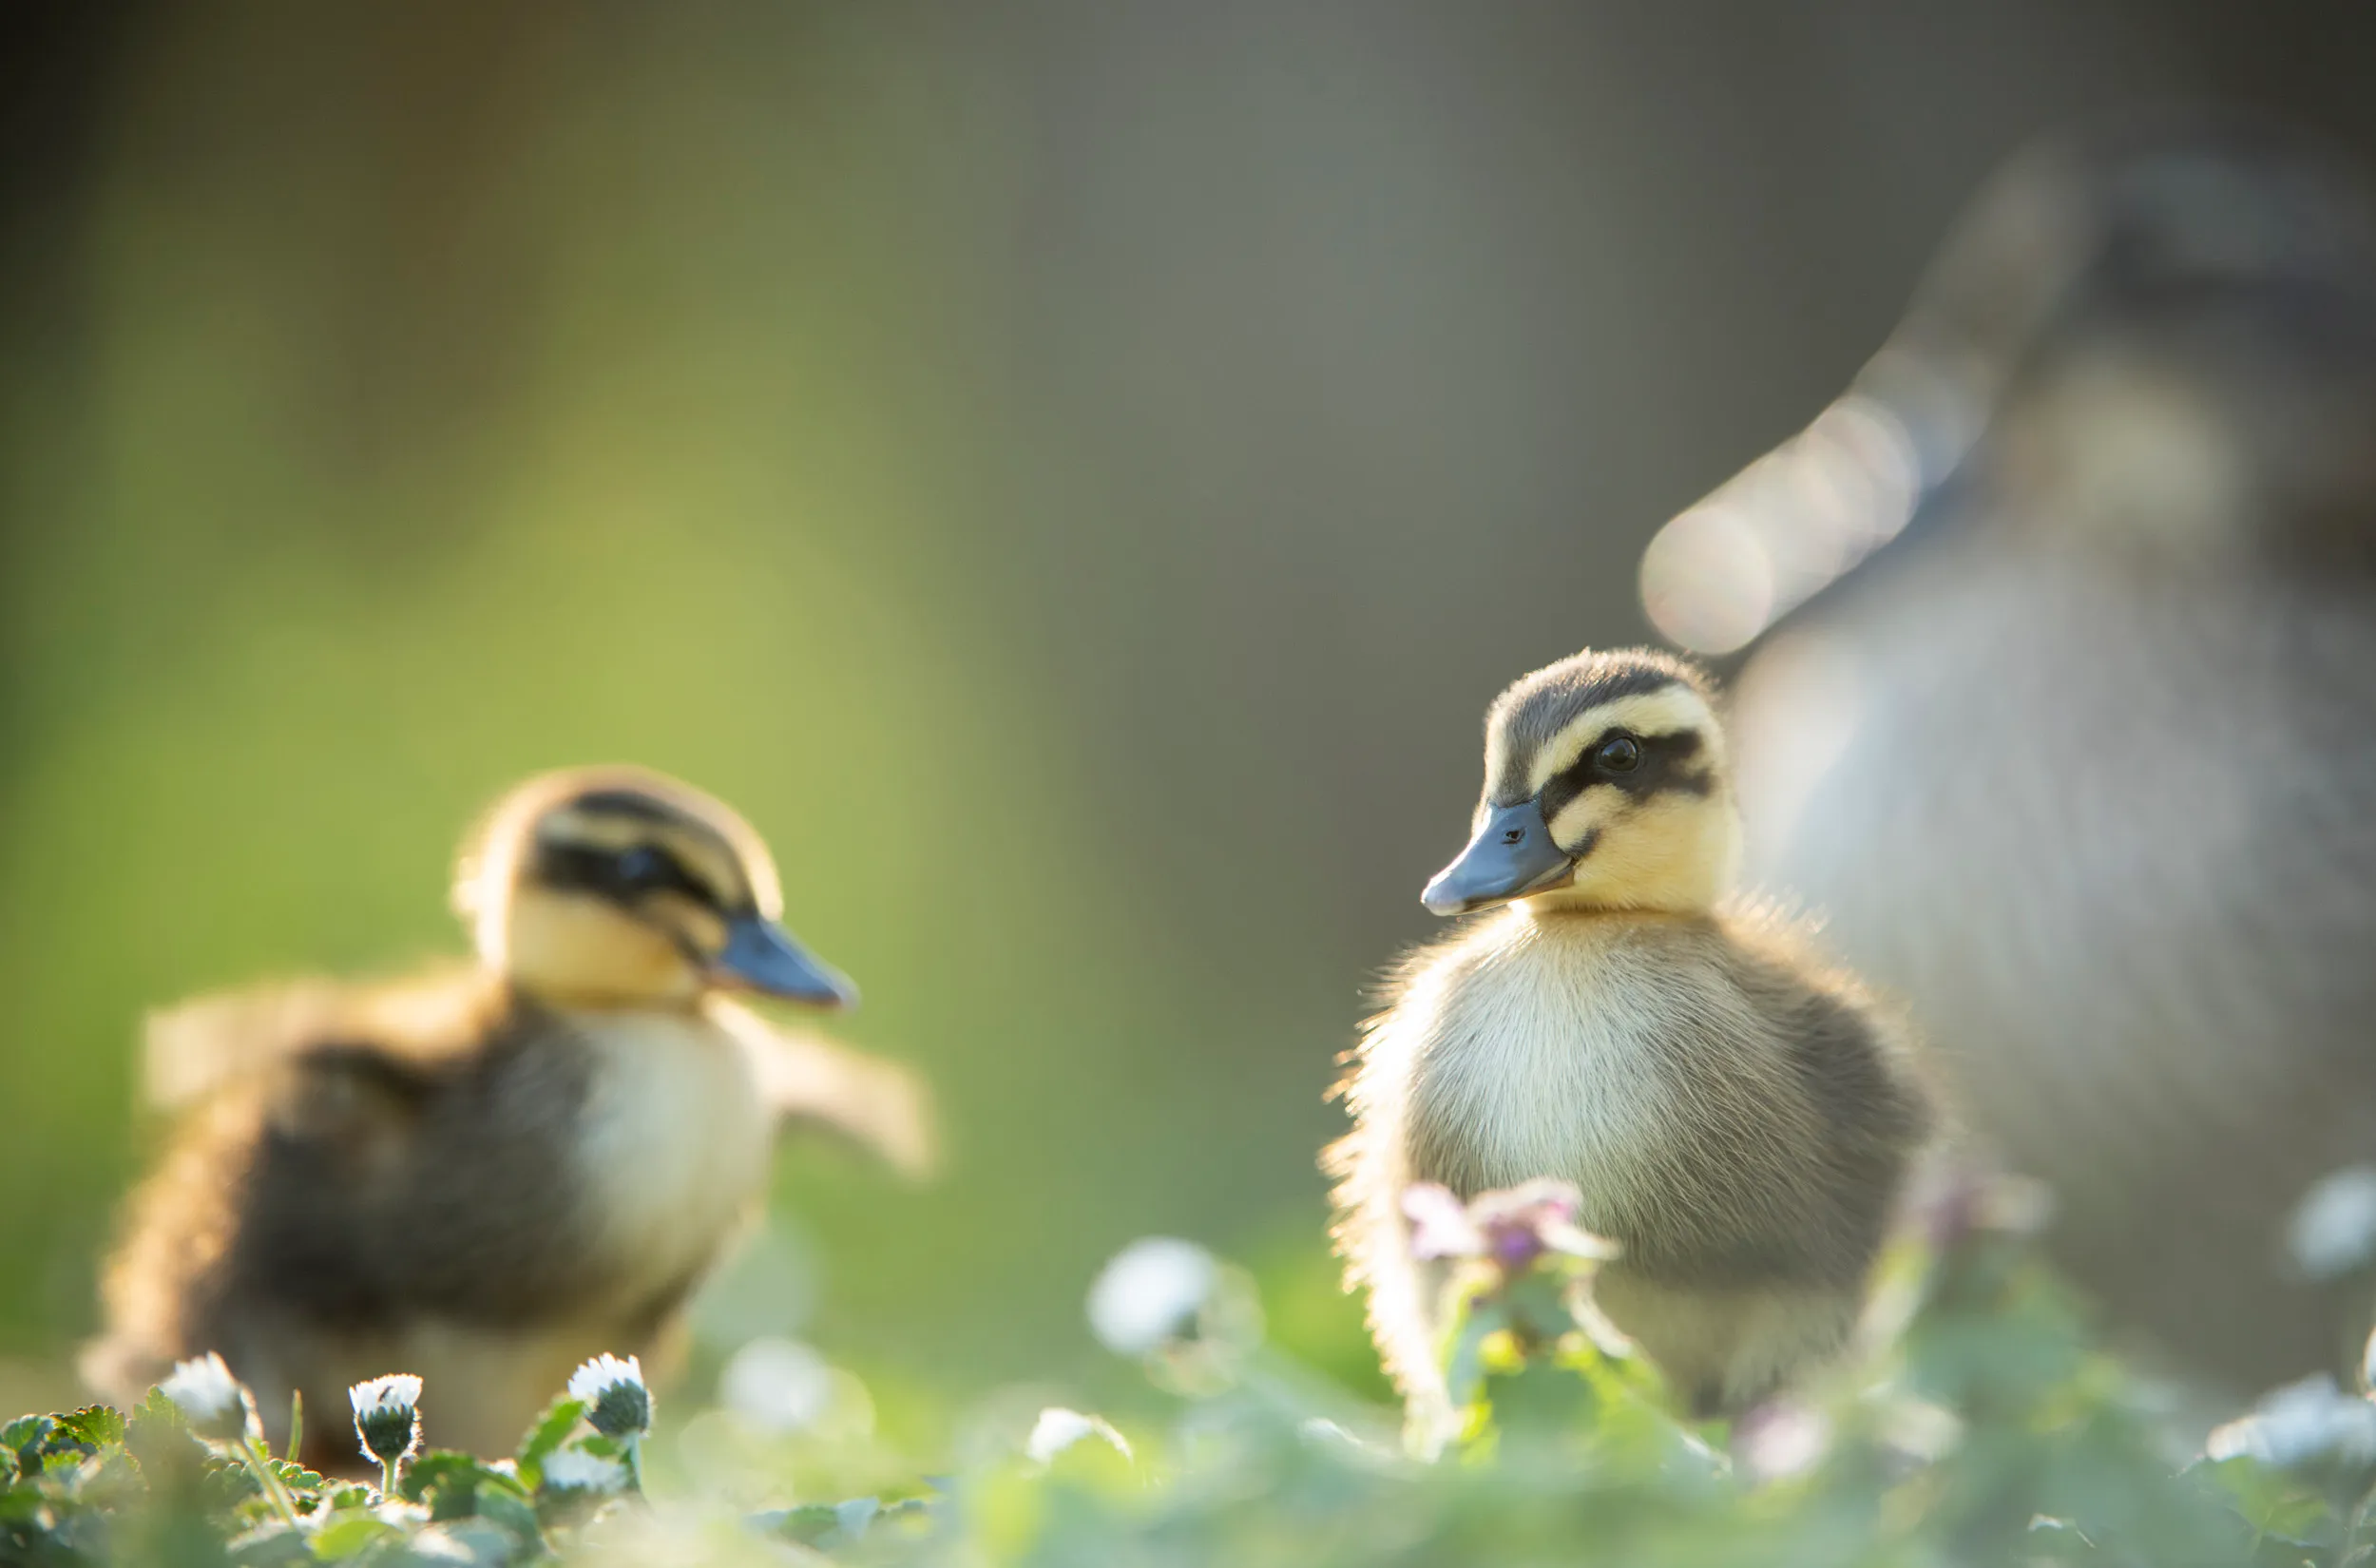 A pair of ducklings stood amongst grass and flowers.